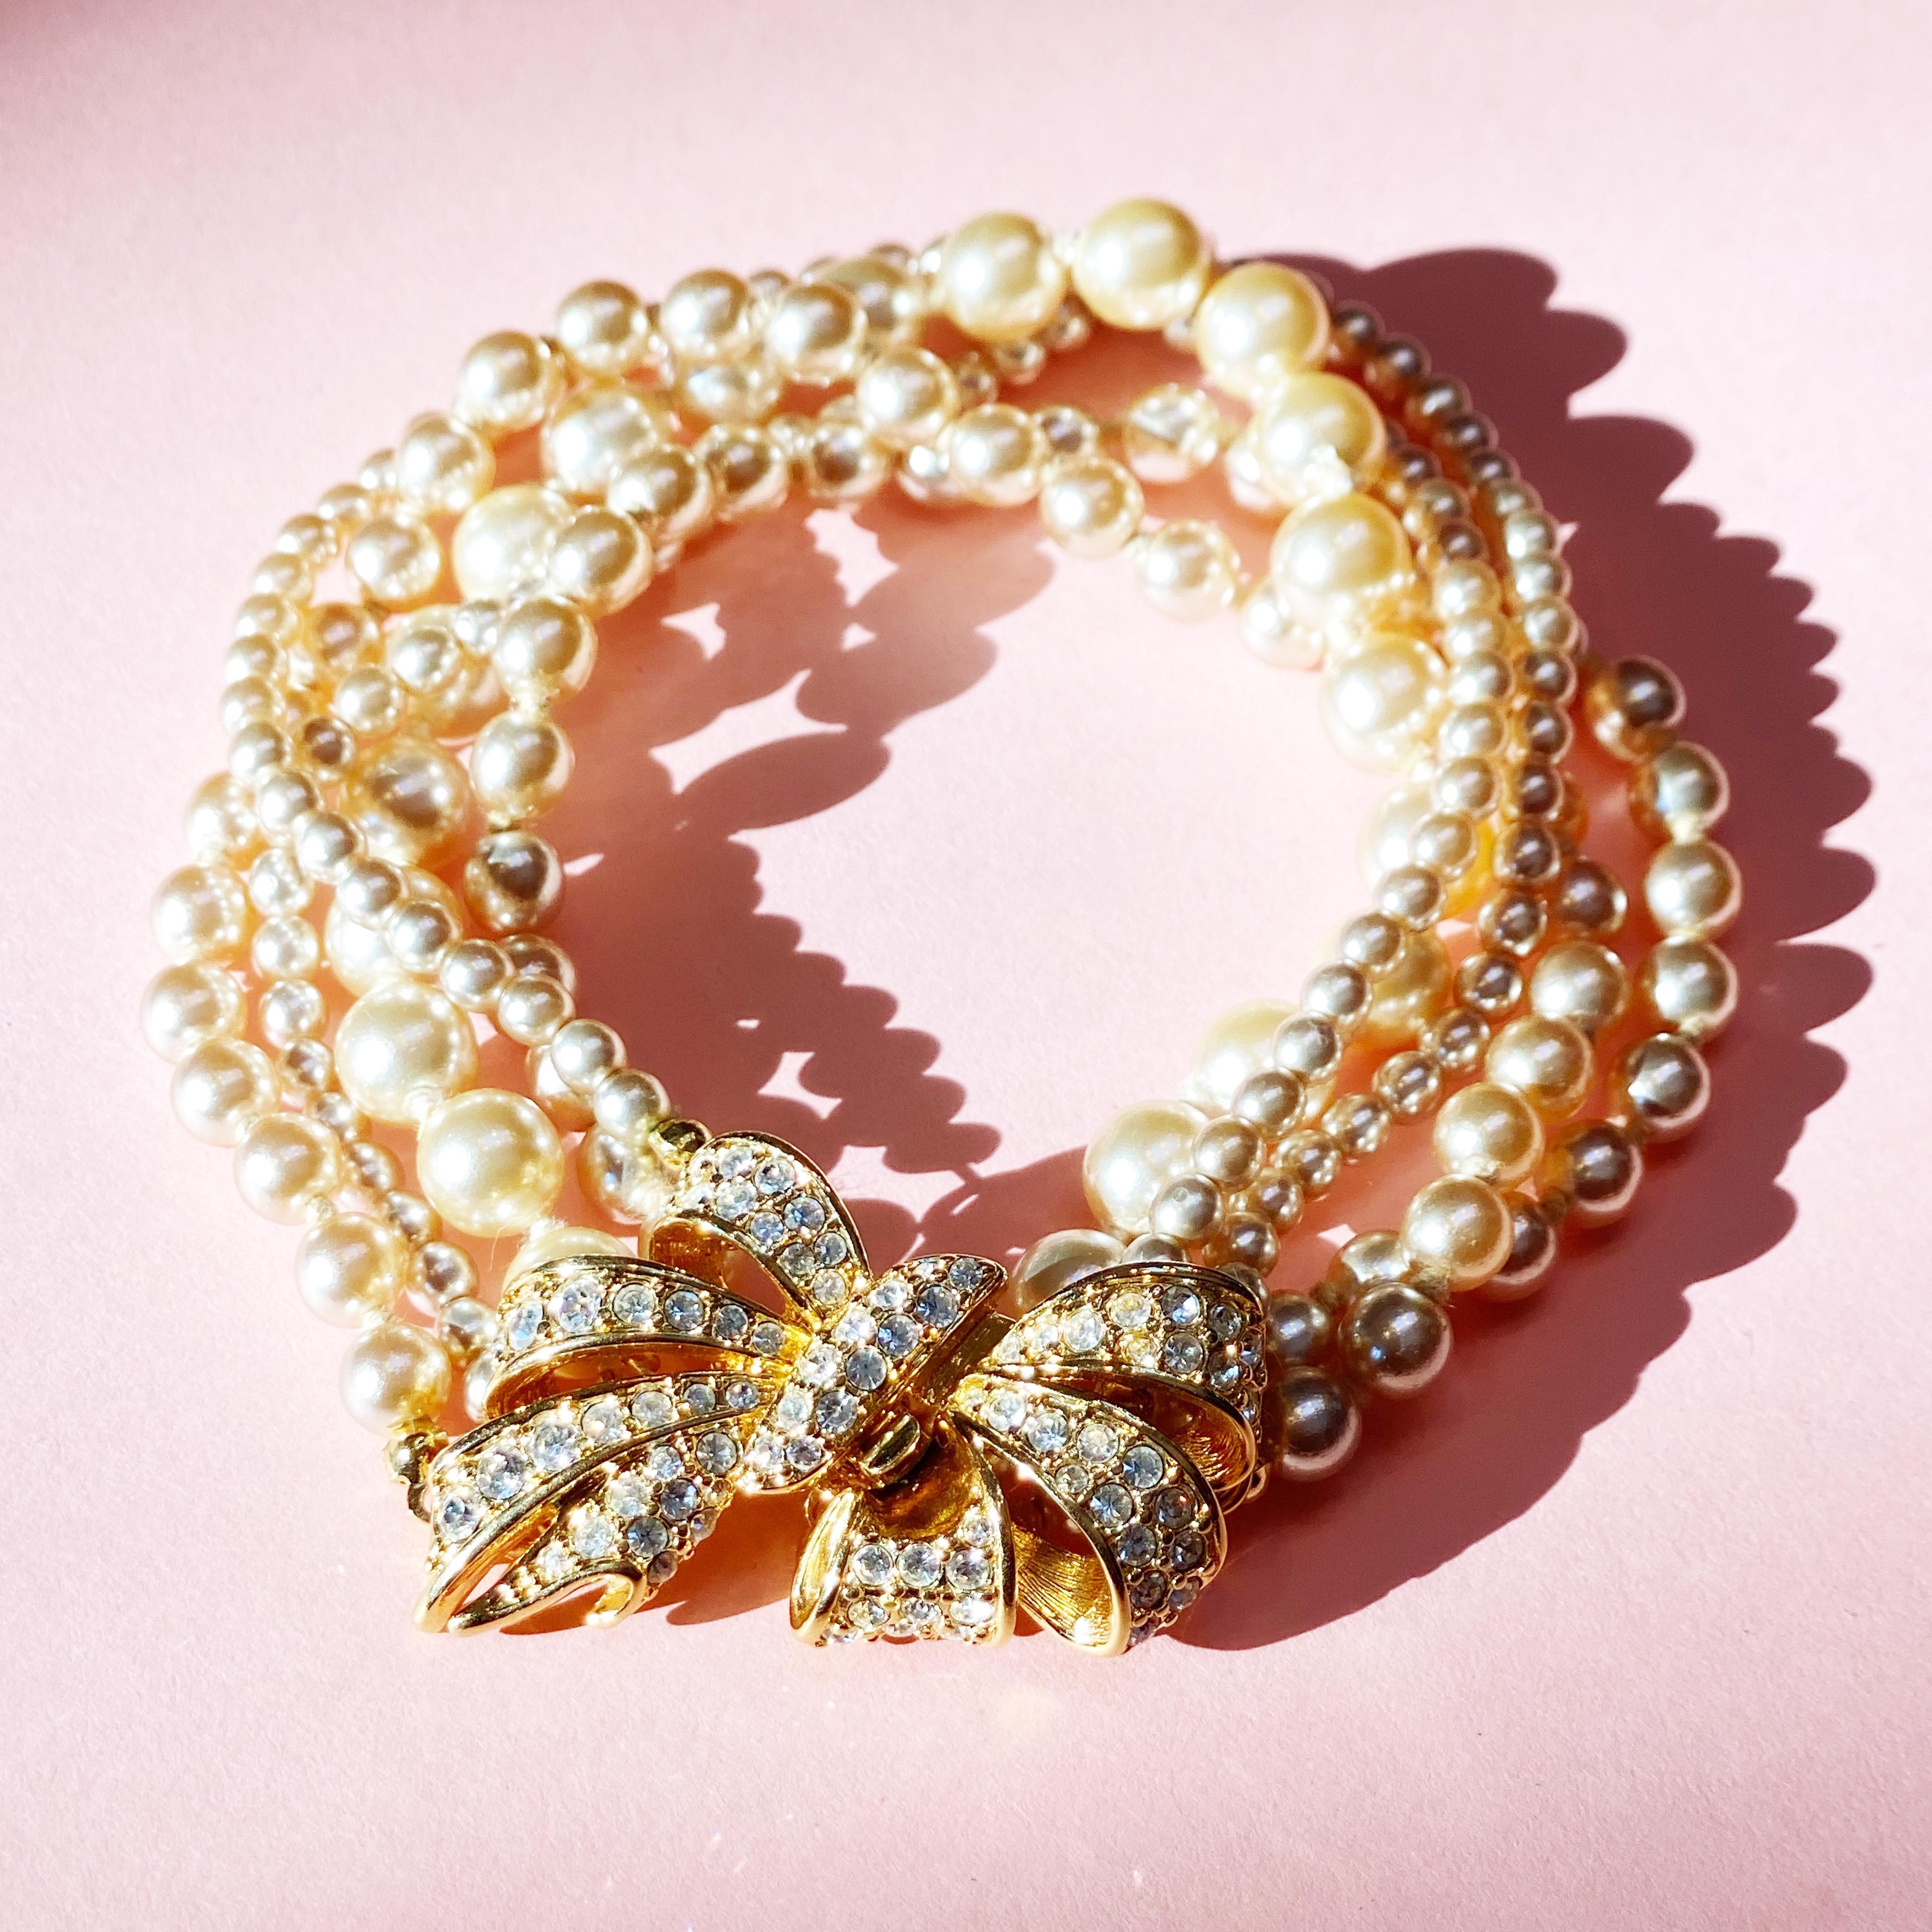 - Vintage item

- Consists of five faux pearl strands

- Gold plated

- Crystal rhinestone accents

- Hidden box clasp

- By Nolan Miller (signed on clasp)

- Circa 1980s

- Estate acquired

- Excellent vintage condition